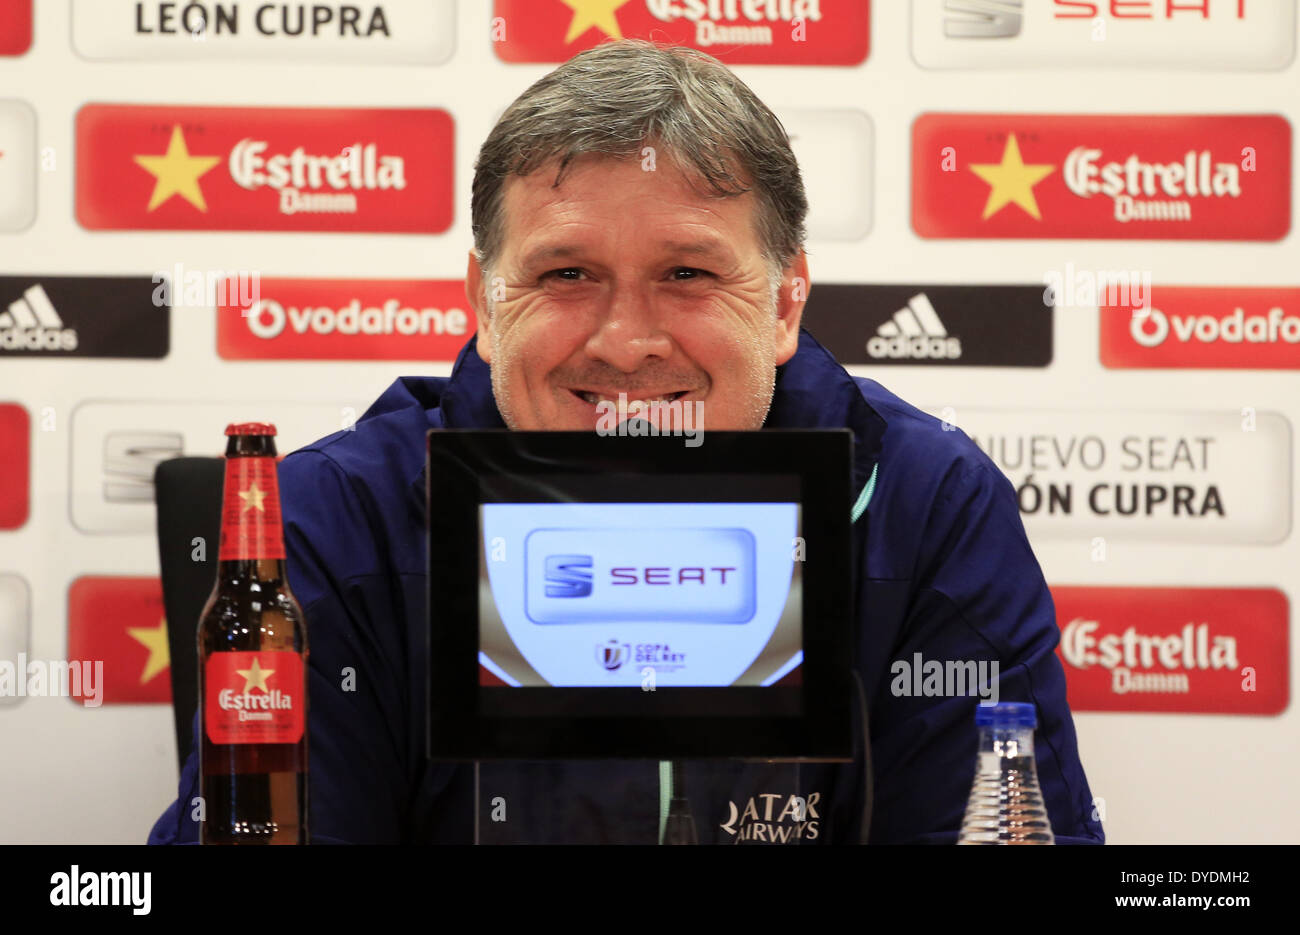 Barcelona, Spain. 15th Apr, 2014. BARCELONA-SPAIN April -15. Gerardo Martino in the FC Barcelona training and press conference preceding the final of the Copa del Rey, which took place at the Ciudad Deportiva Joan Gamper of FC Barcelona, ''on April 5, 2014 Photo: Joan Valls/Urbanandsport /Nurphoto © Joan Valls/NurPhoto/ZUMAPRESS.com/Alamy Live News Stock Photo